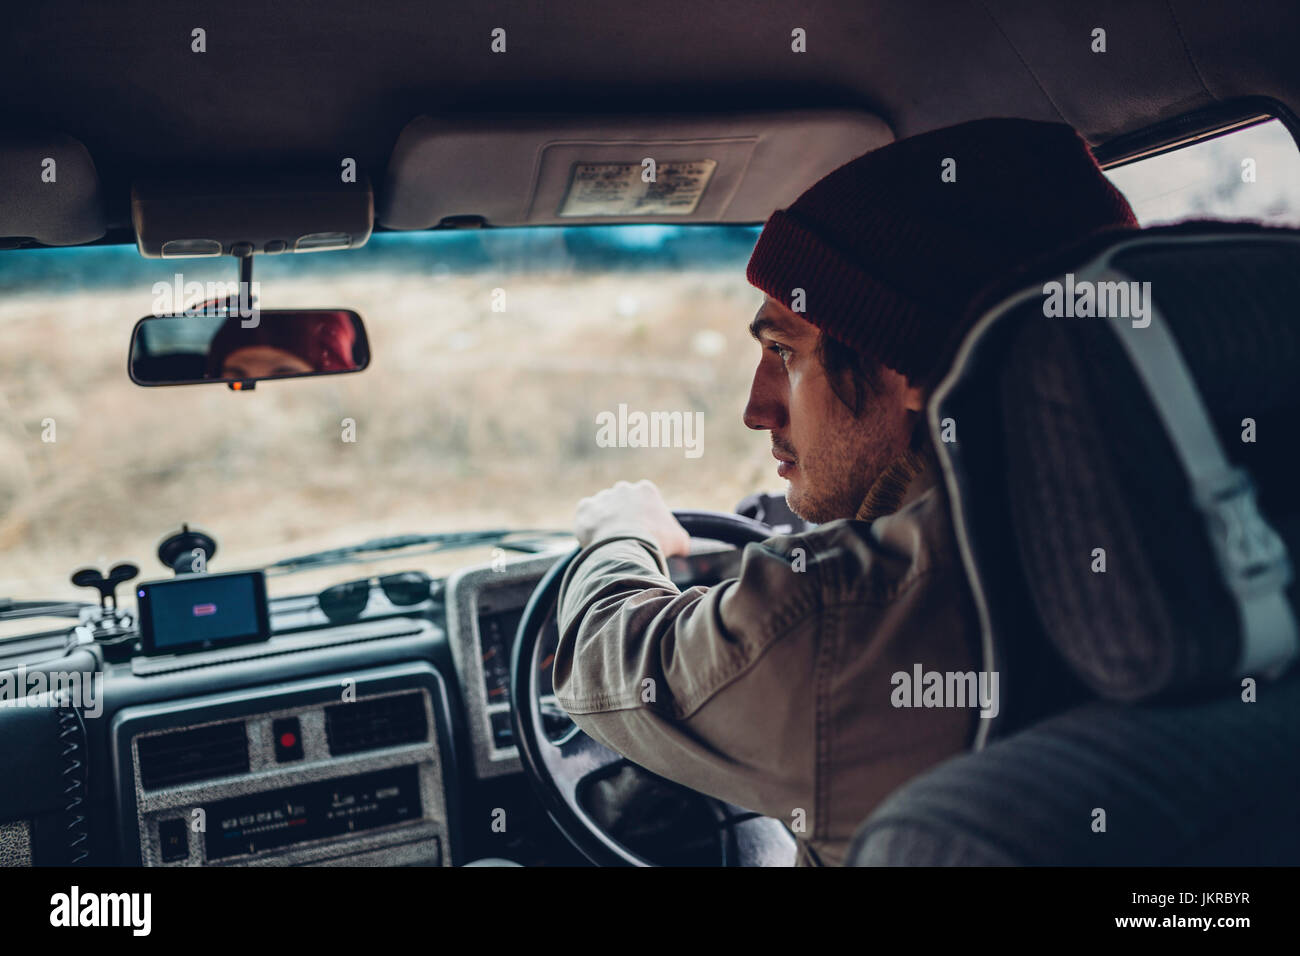 Rear view of man driving sports utility vehicle Stock Photo